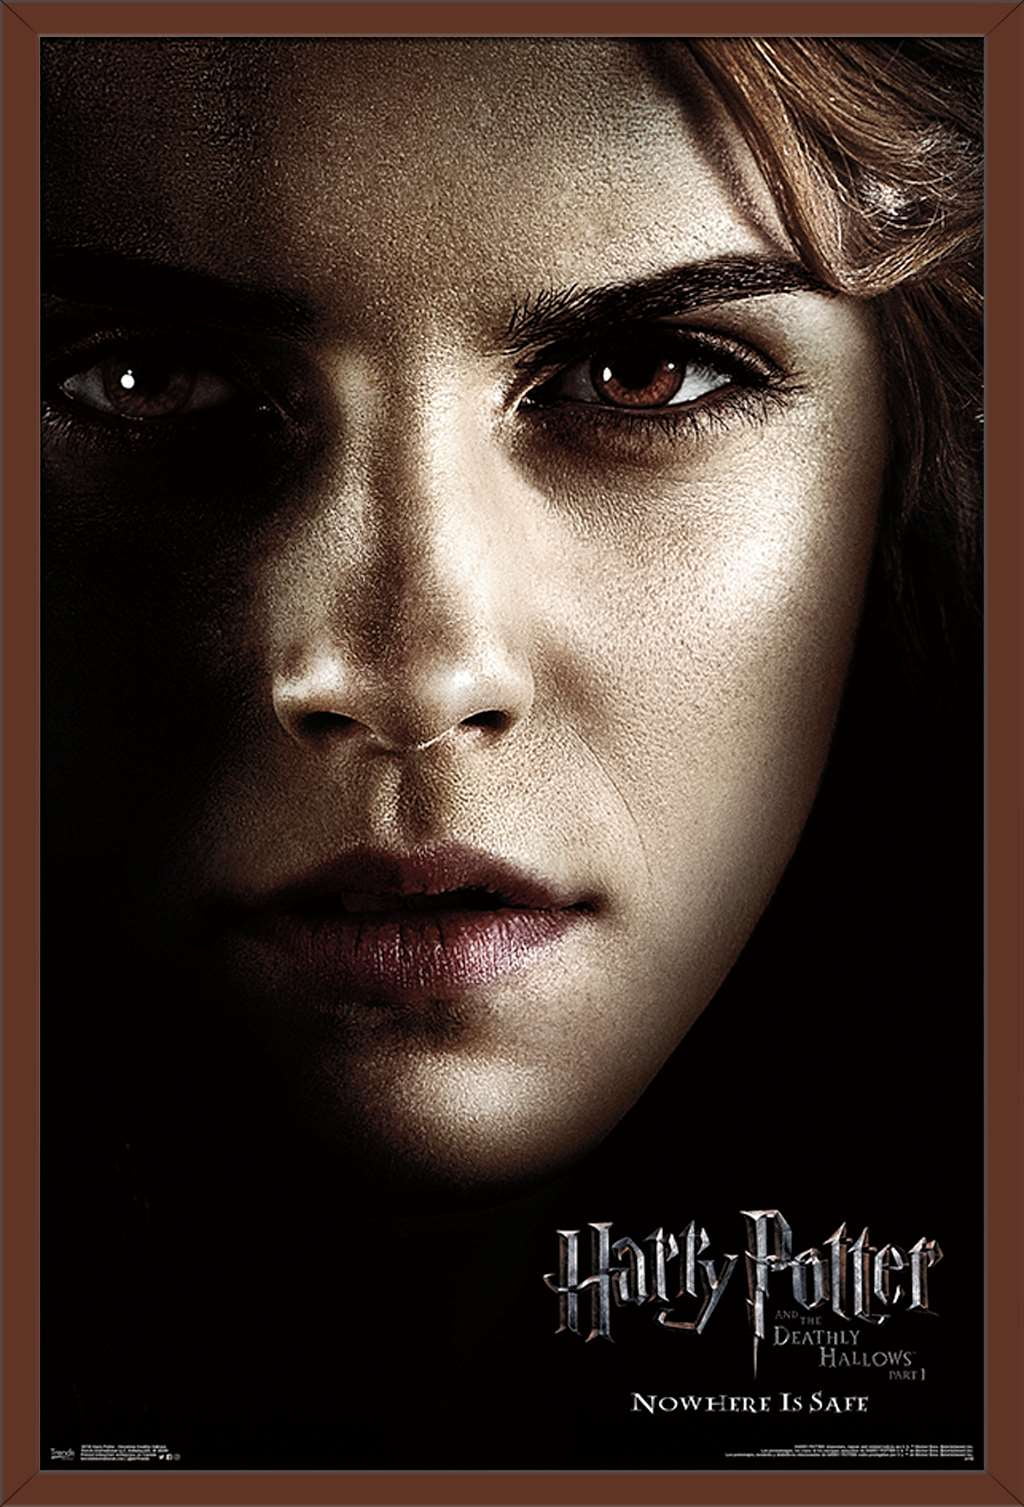 Harry Potter And The Deathly Hallows Movie Poster Print T463, A4 A3 A2 A1  A0